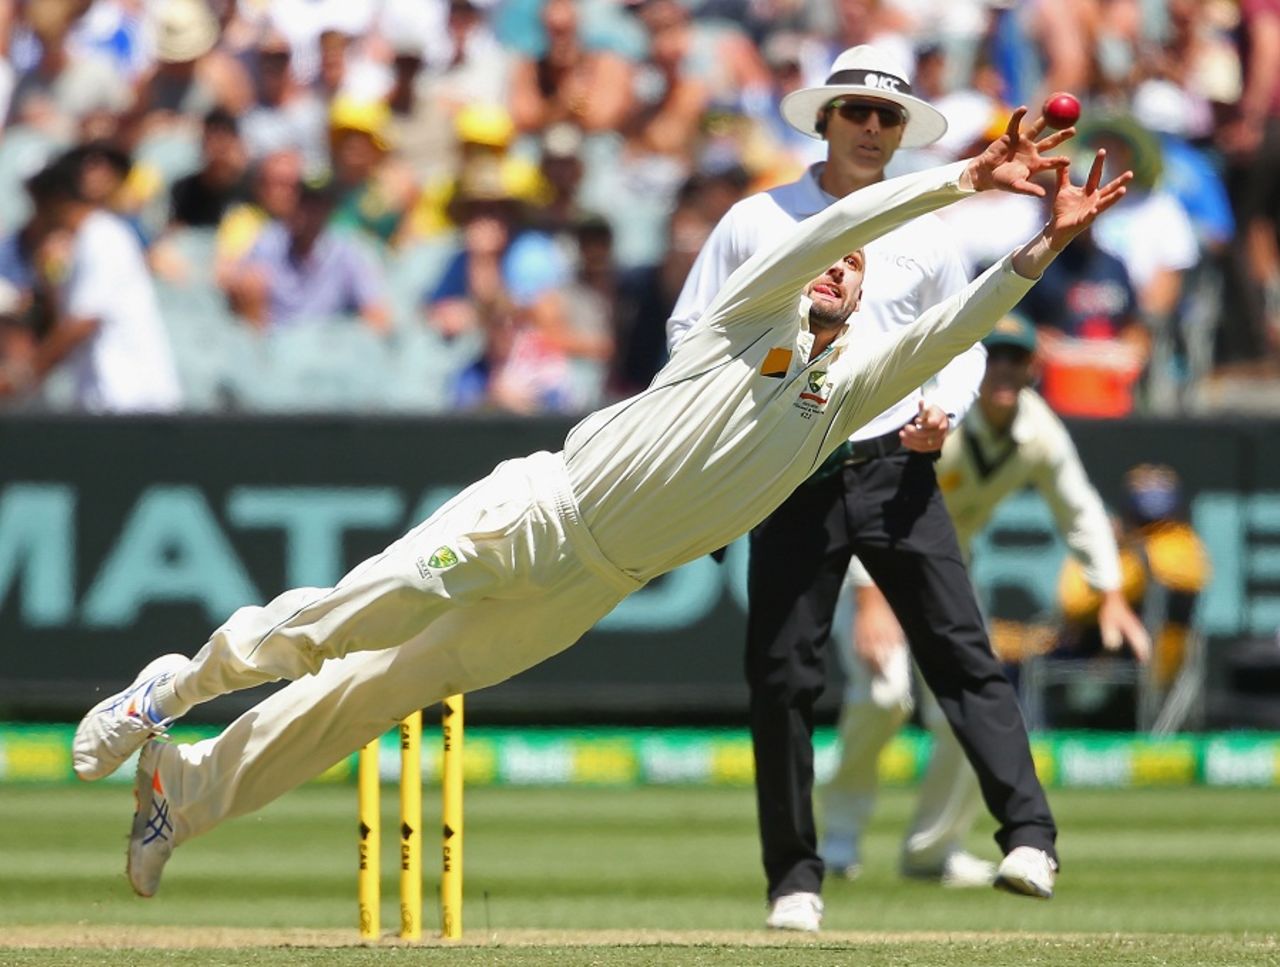 Nathan Lyon attempts a diving catch of his own bowling, Australia v West Indies, 2nd Test, Melbourne, 2nd day, December 27, 2015